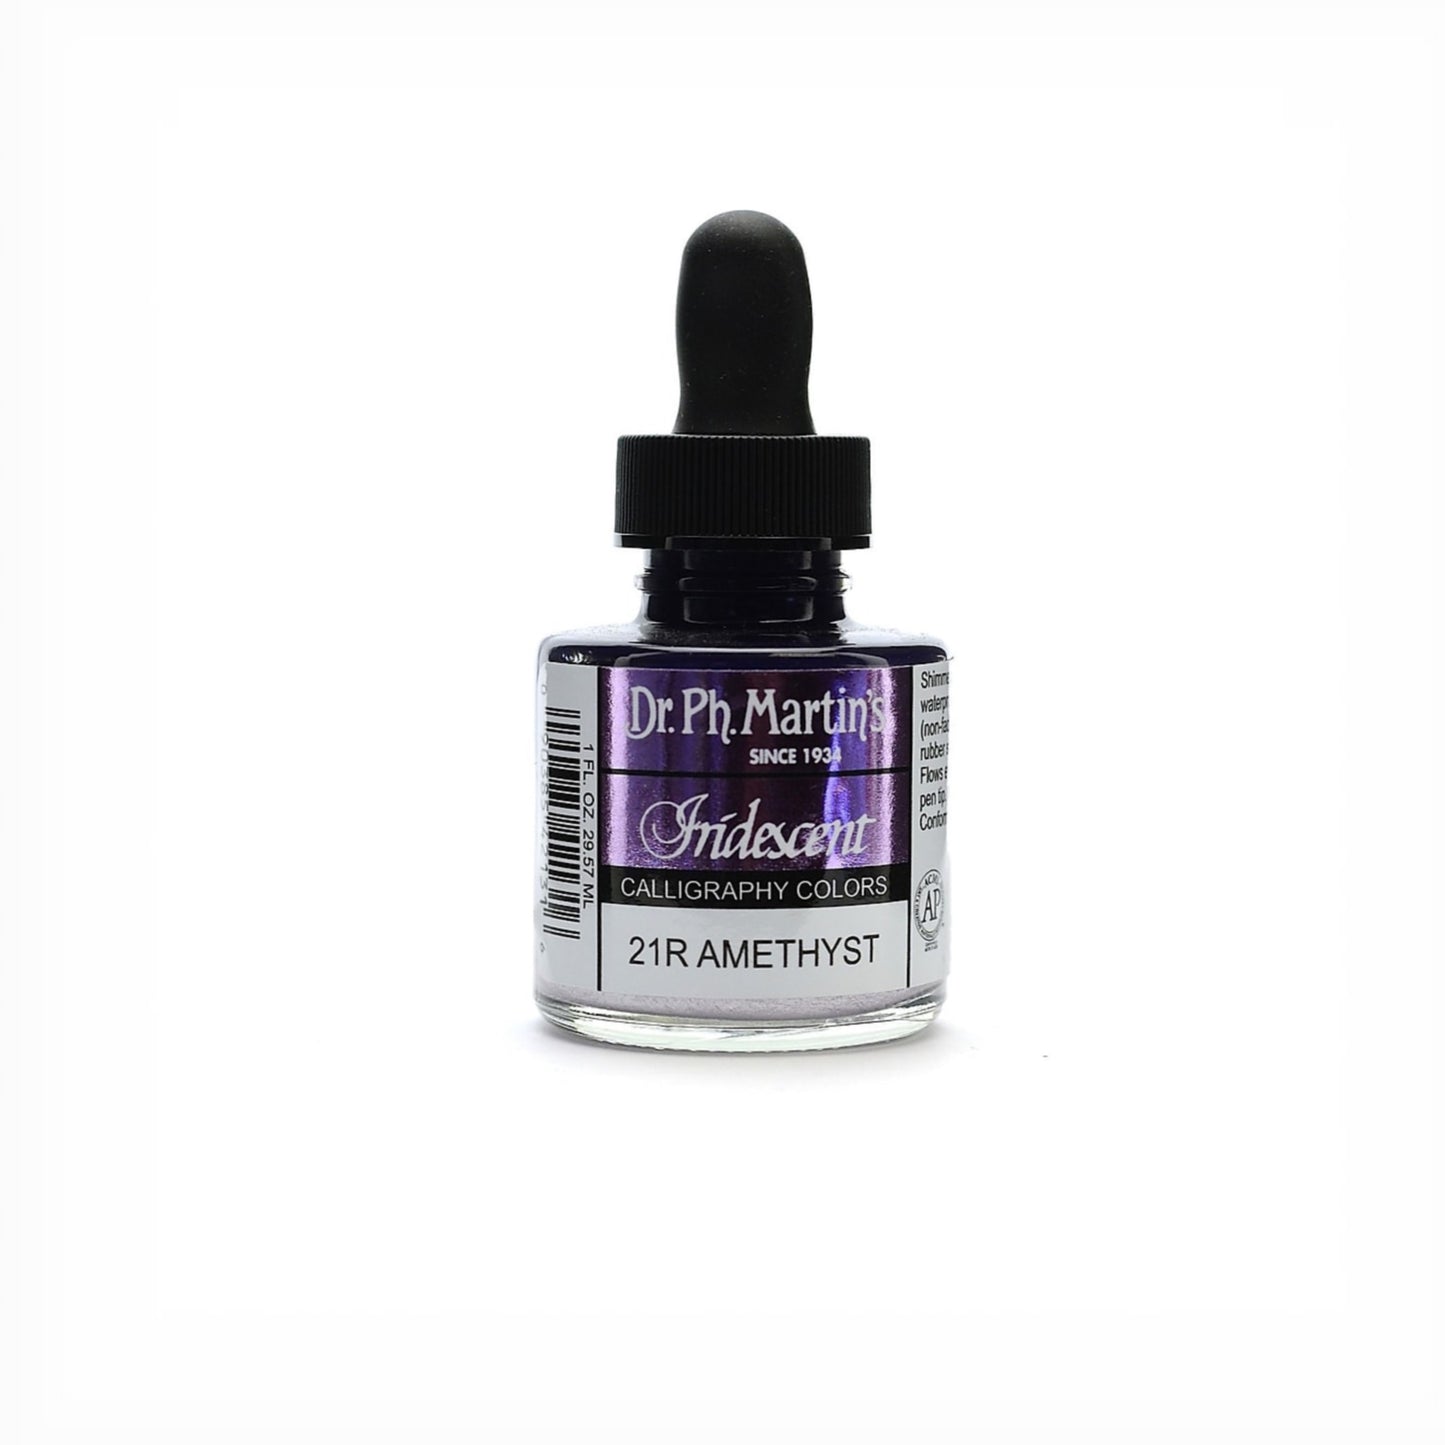 Dr. Ph. Martin's Iridescent Calligraphy Colors - Amethyst by Dr. Ph. Martin’s - K. A. Artist Shop